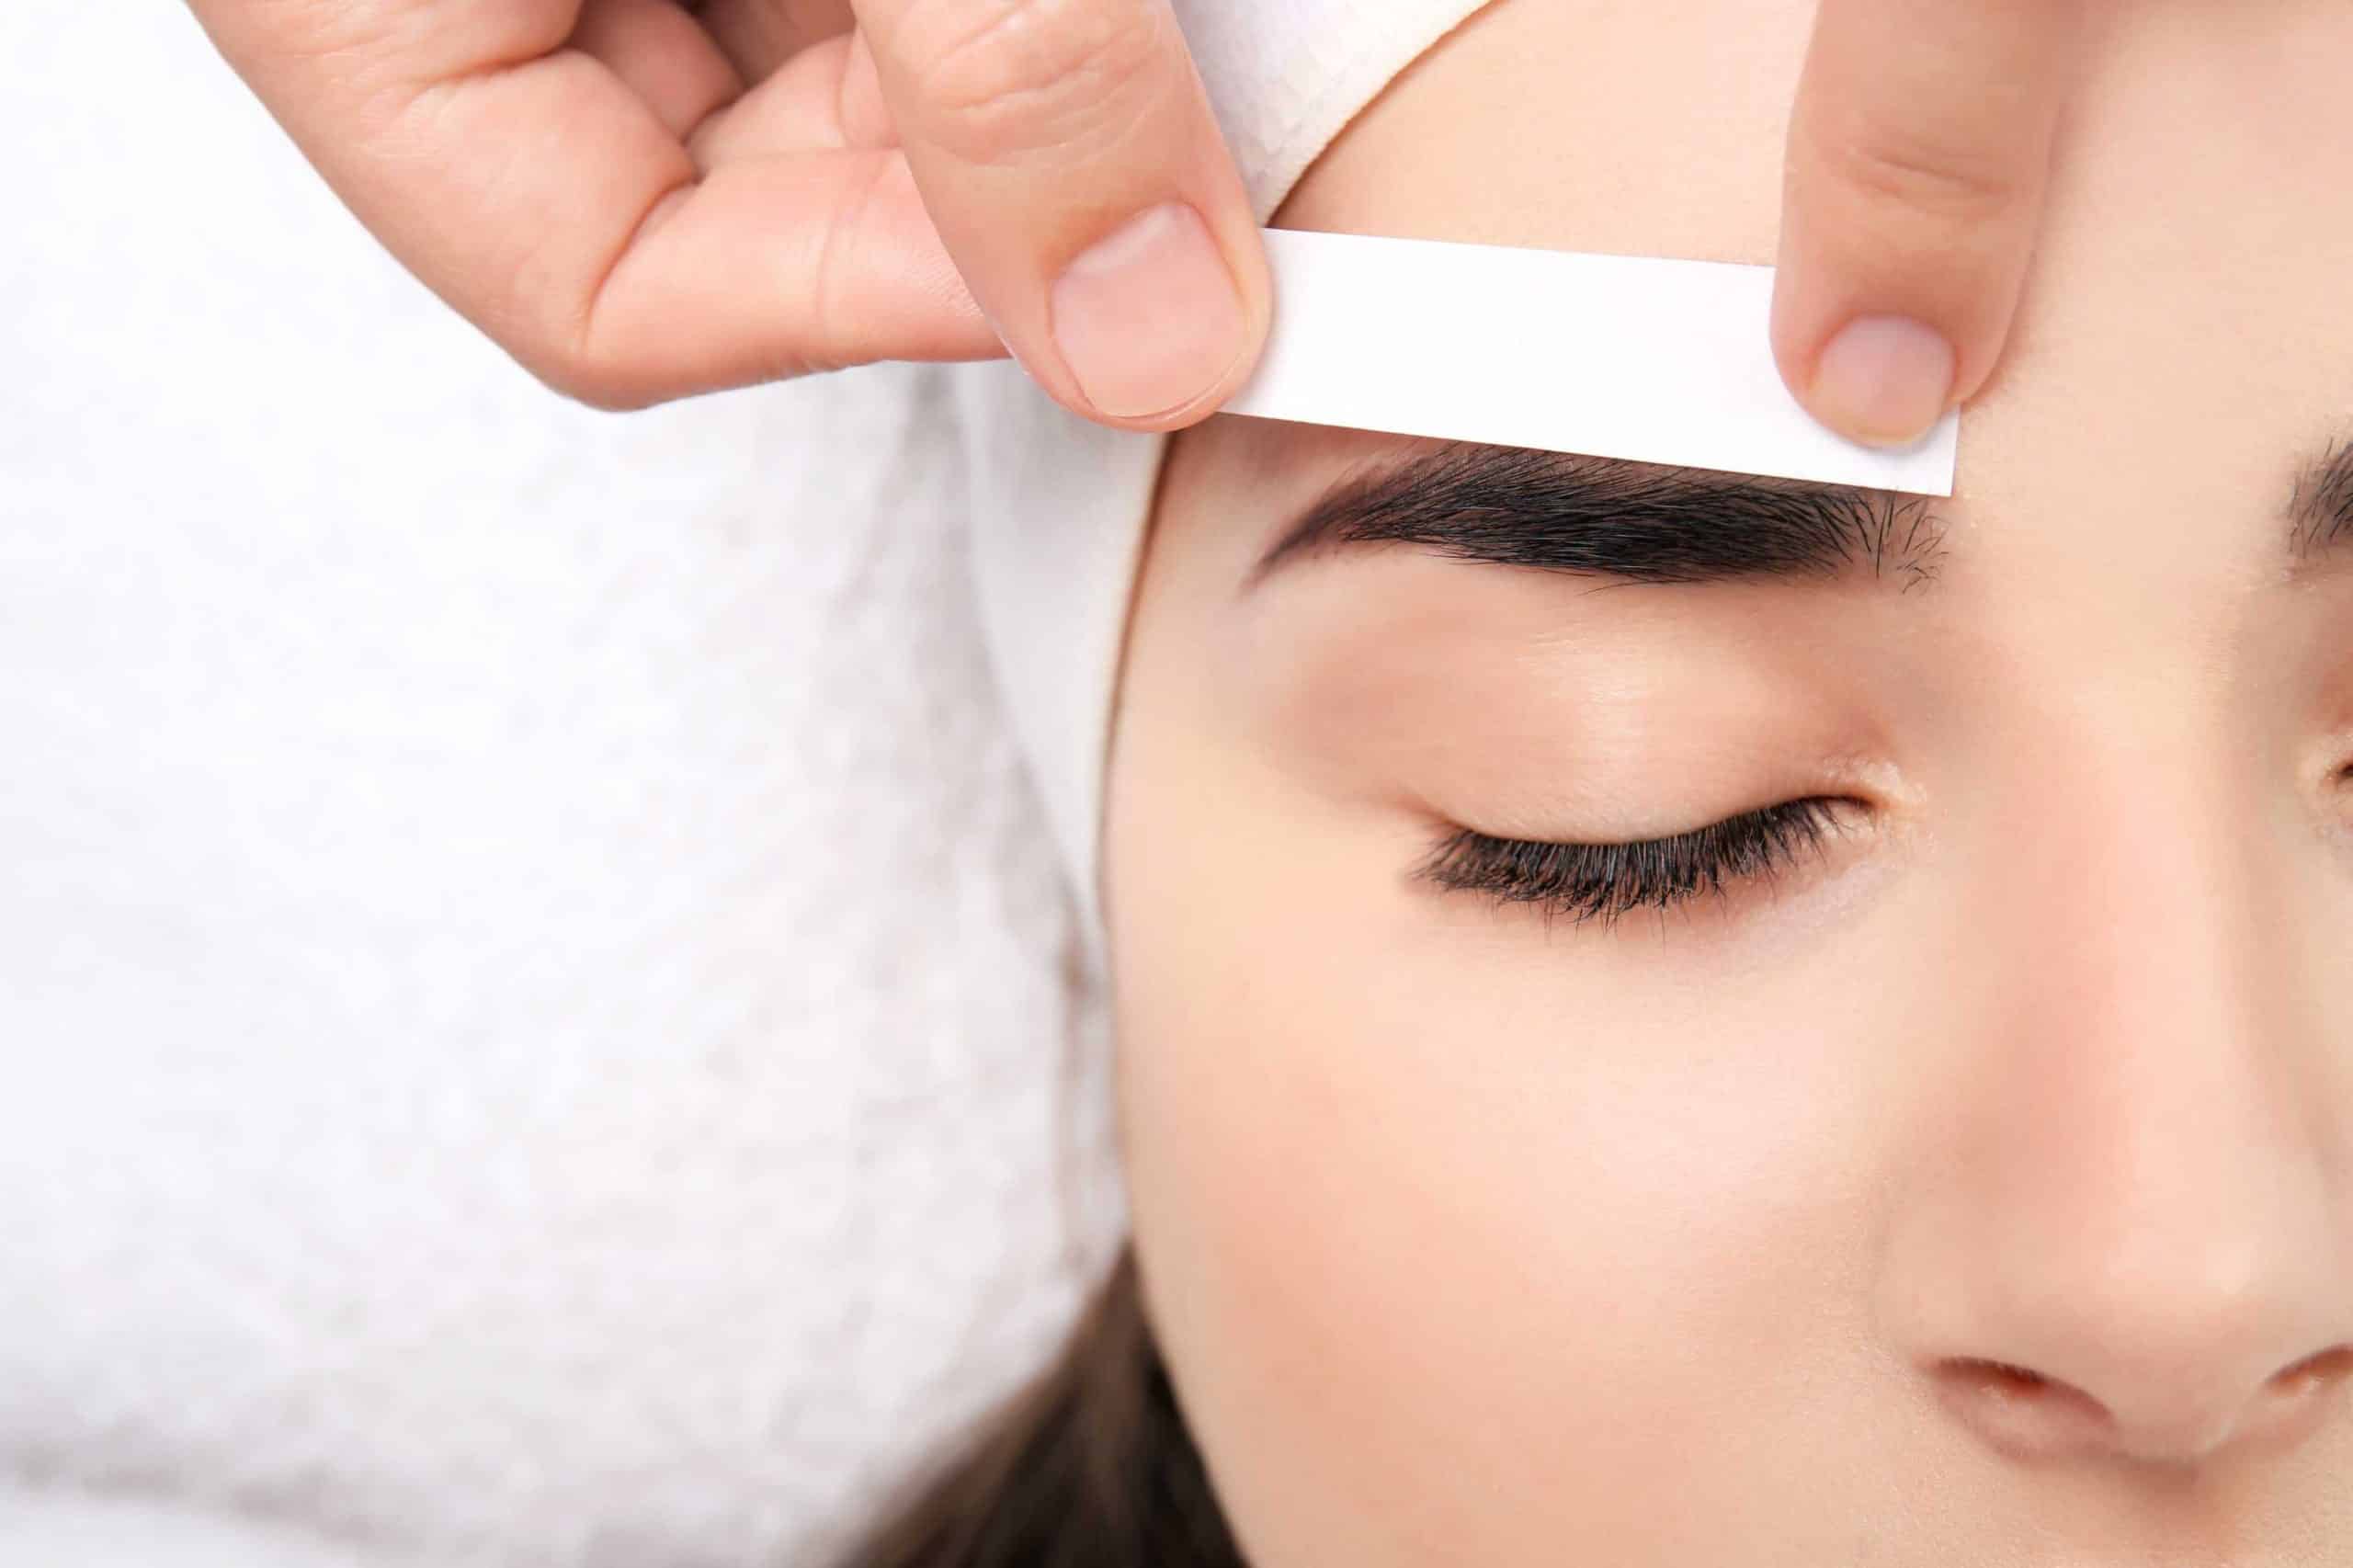 Eyebrow Waxing: PROCEDURES INVOLVED IN IT AND ITS PROS AND CONS